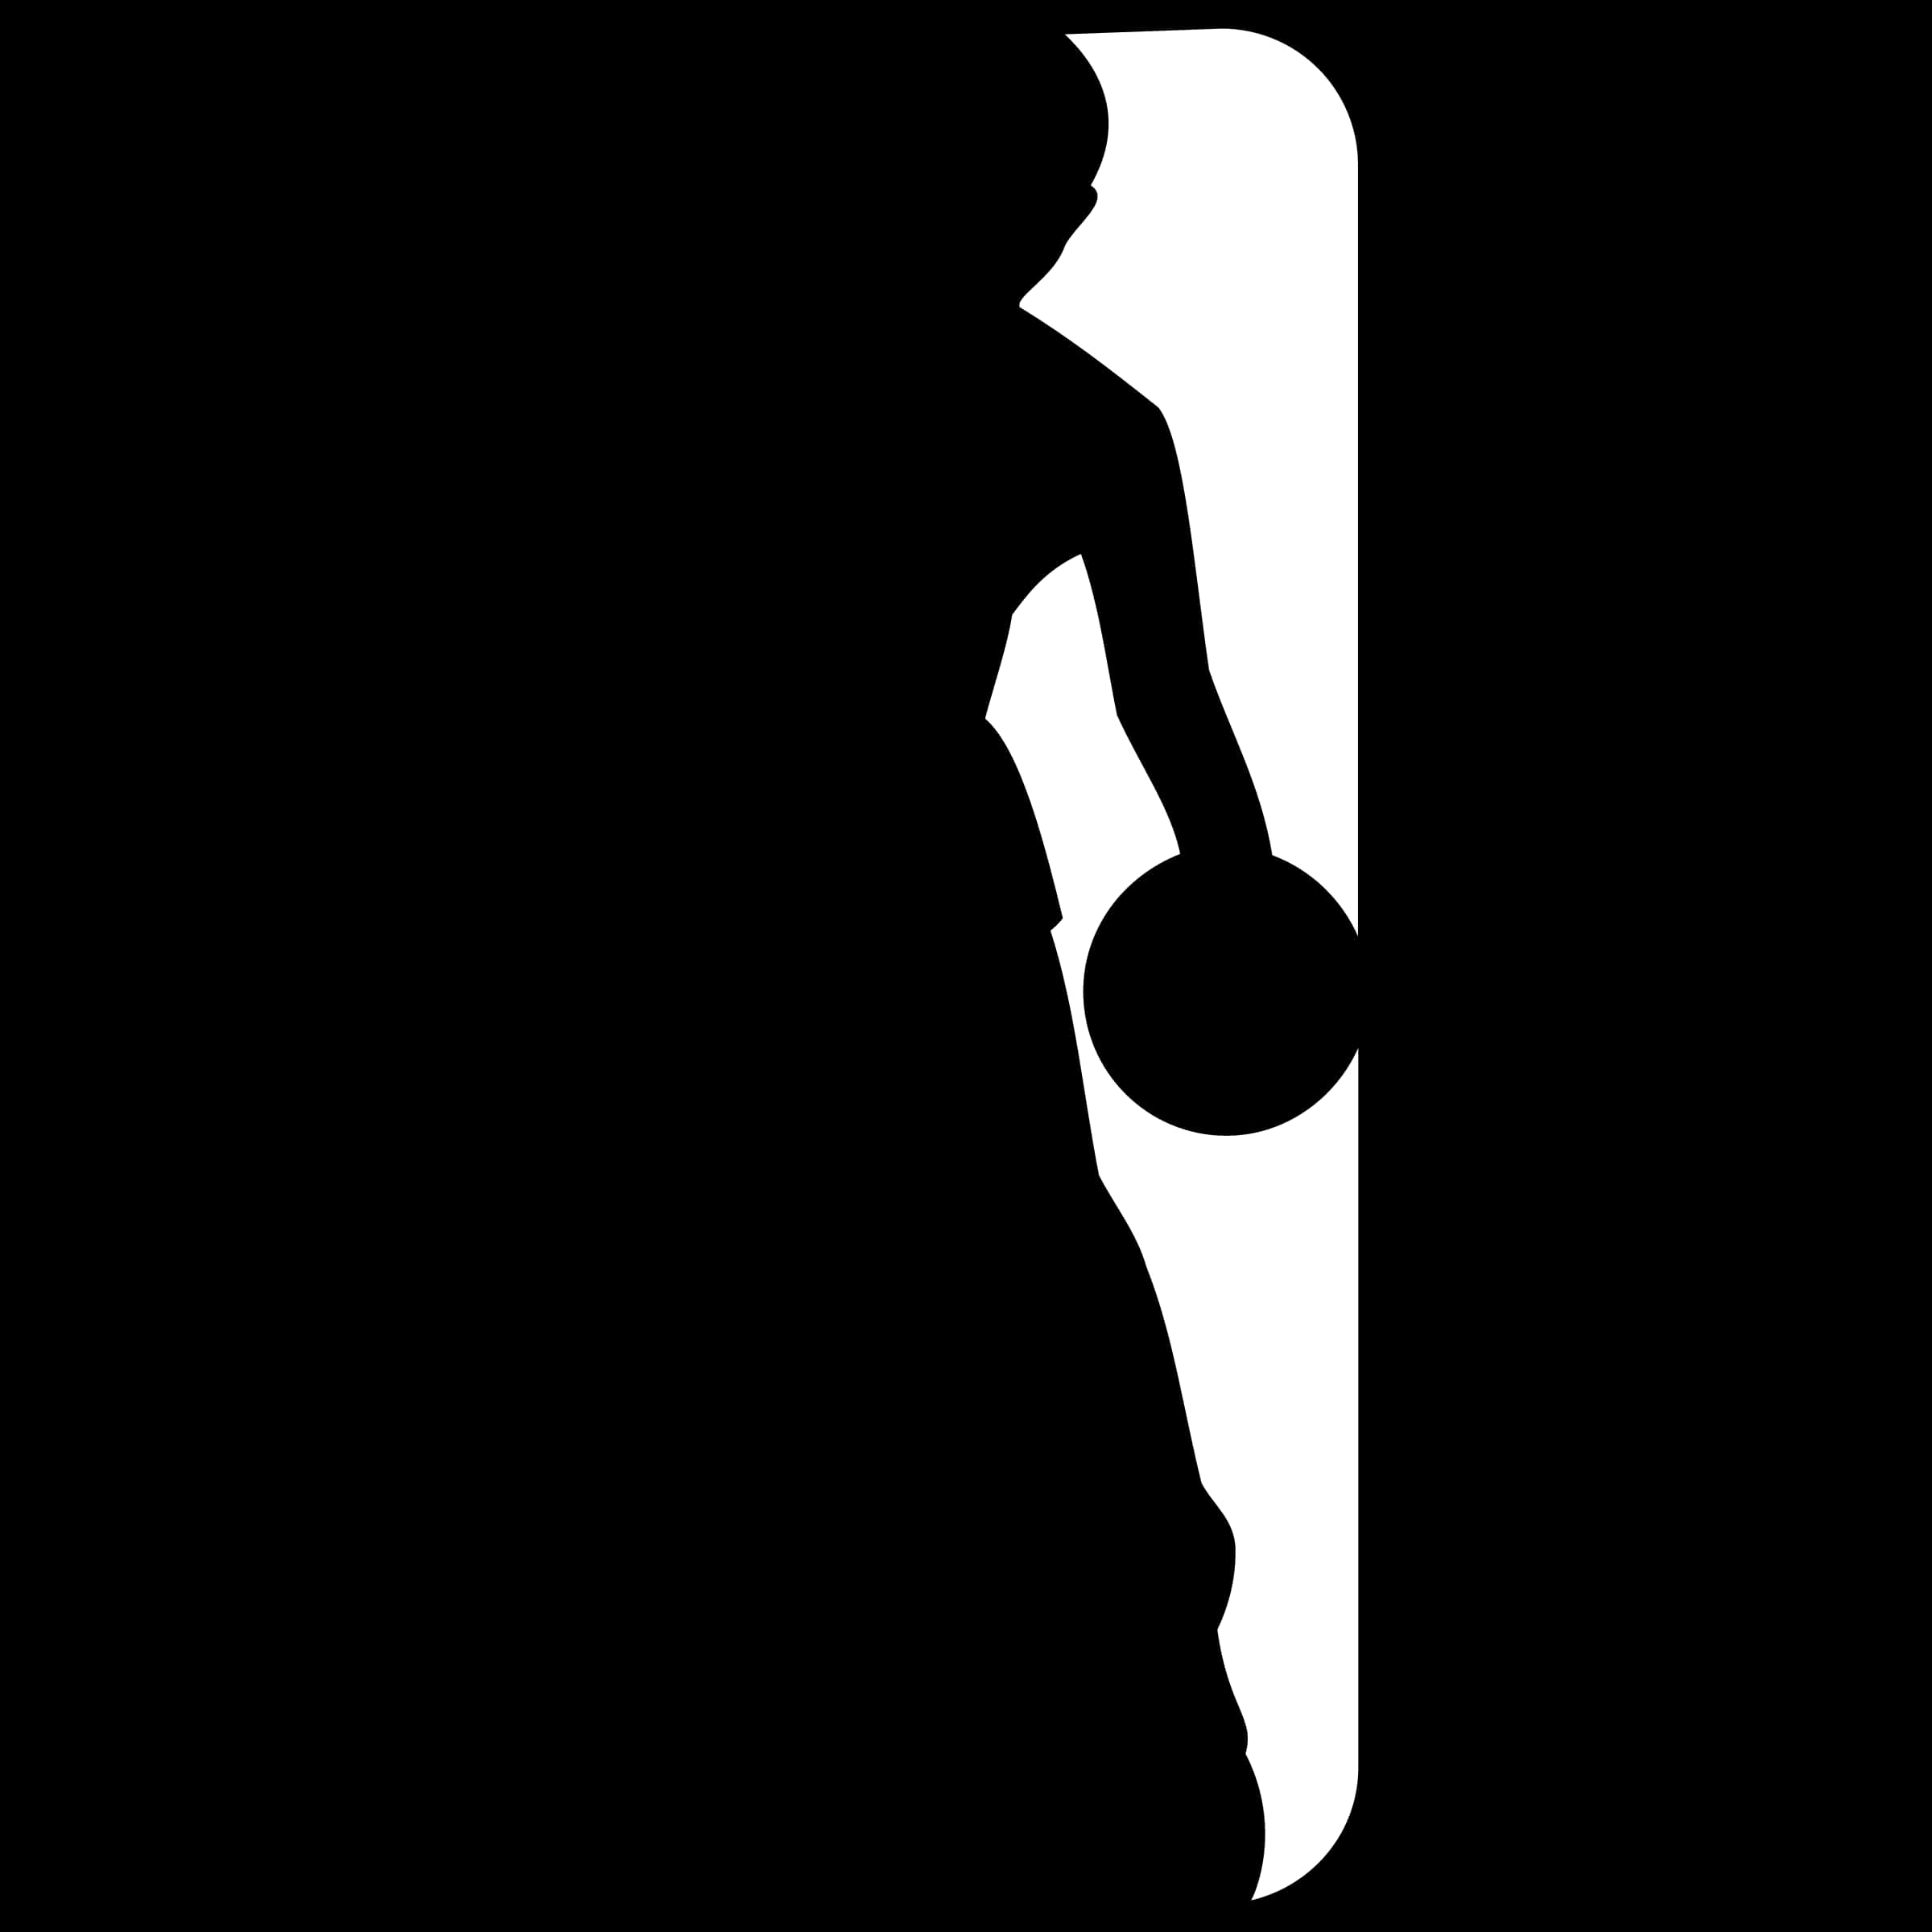 A Silhouette Of A Person Holding A Ball